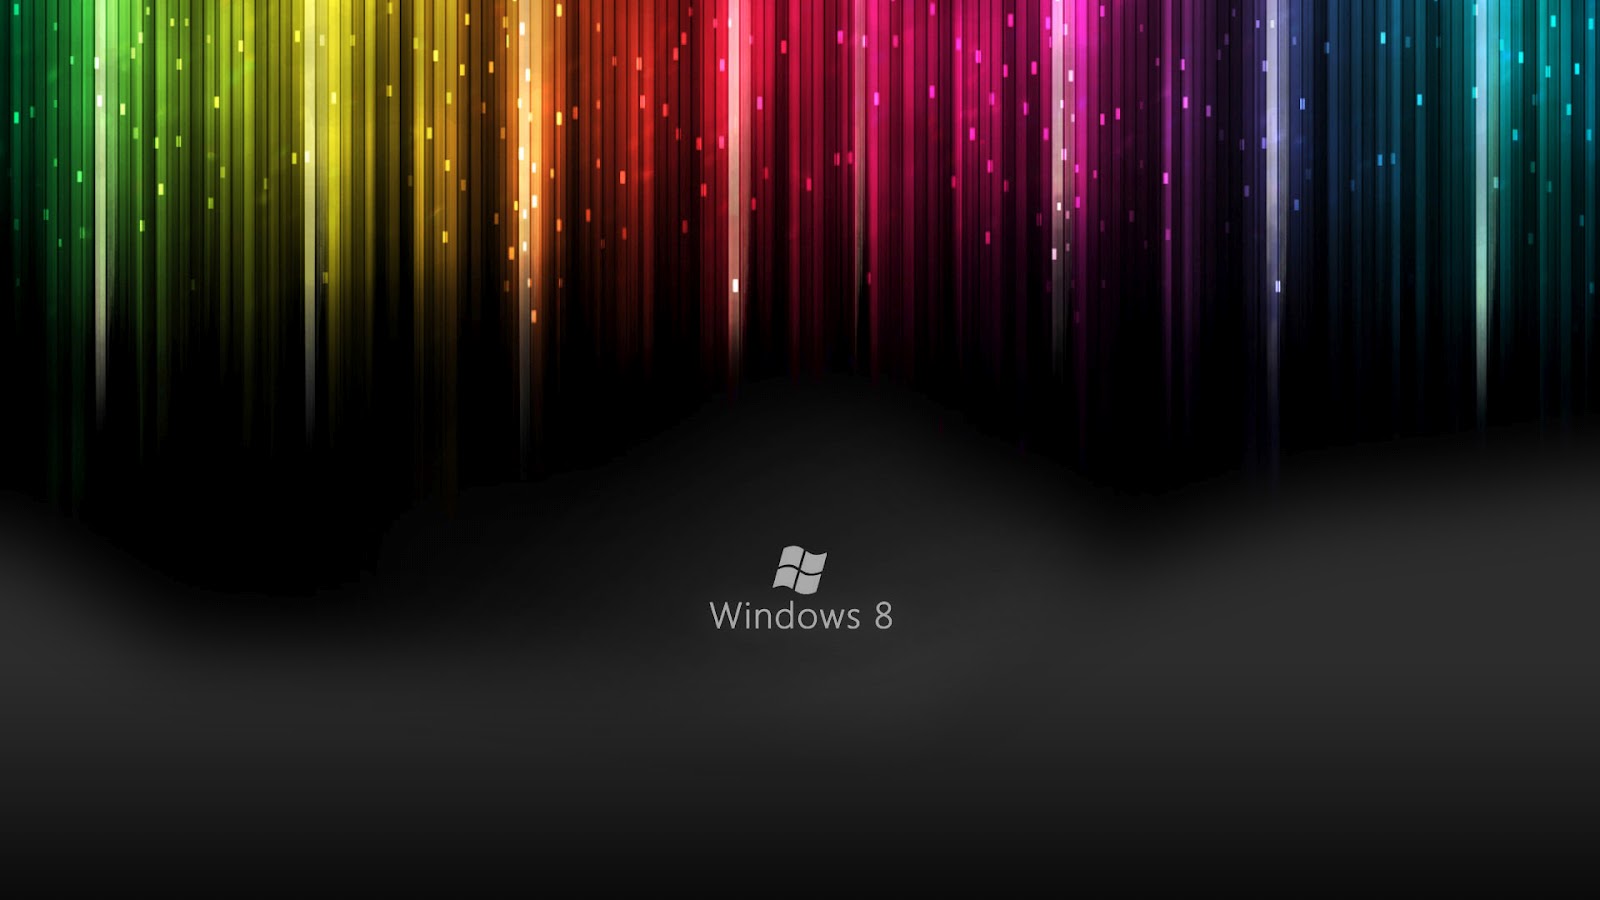 Wallpaper Hd 1080p Free Download For Windows 8